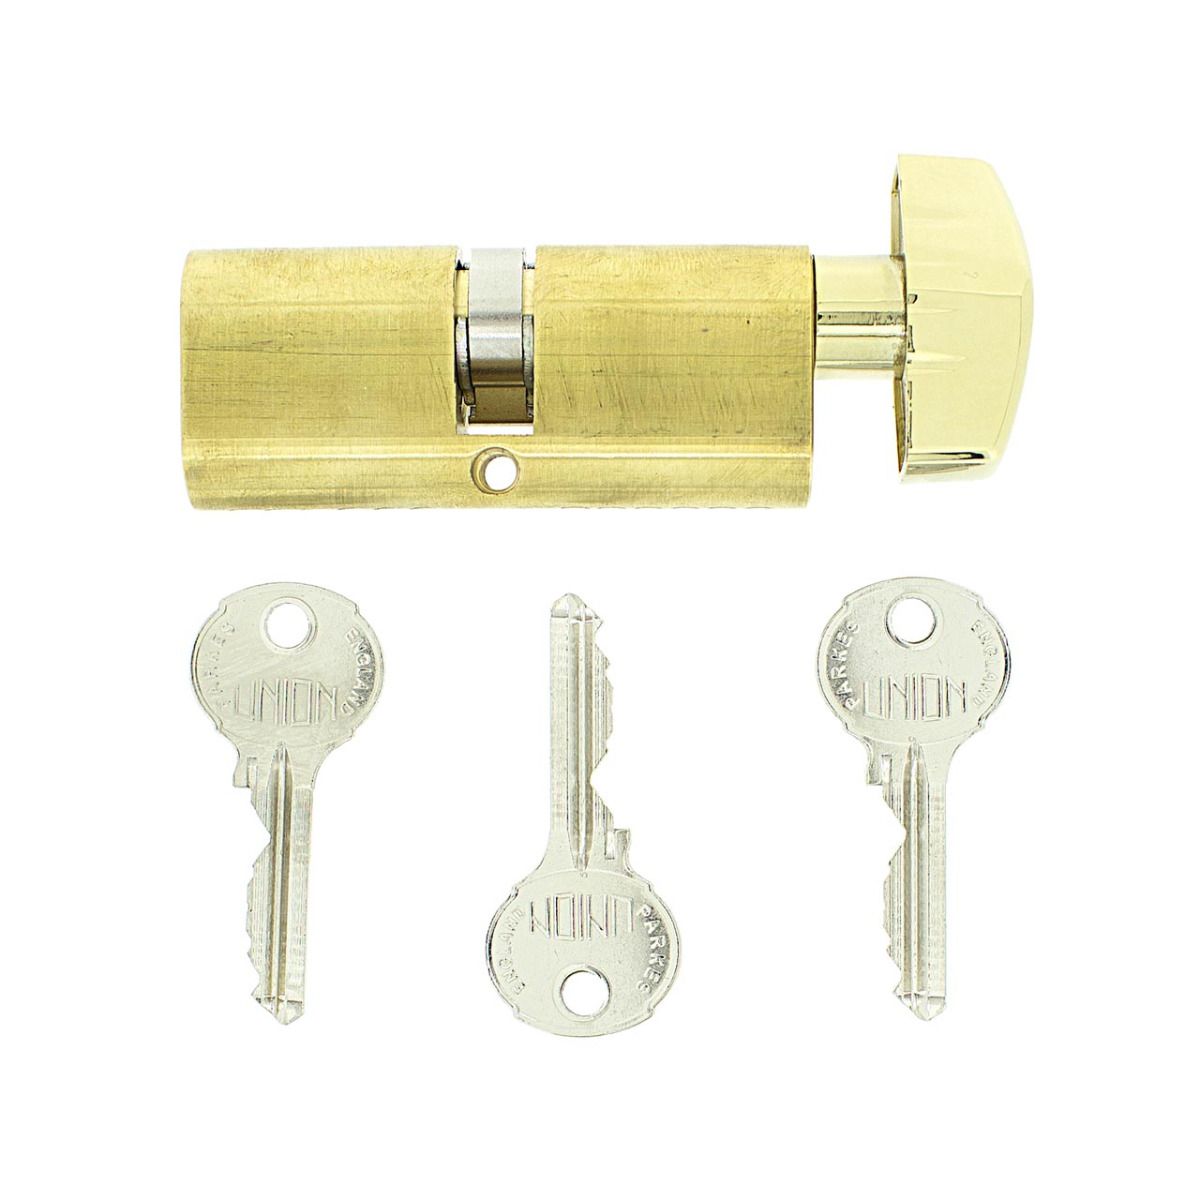 Dimensions Image: Union 2 x 13 Oval Key and Turn Cylinder